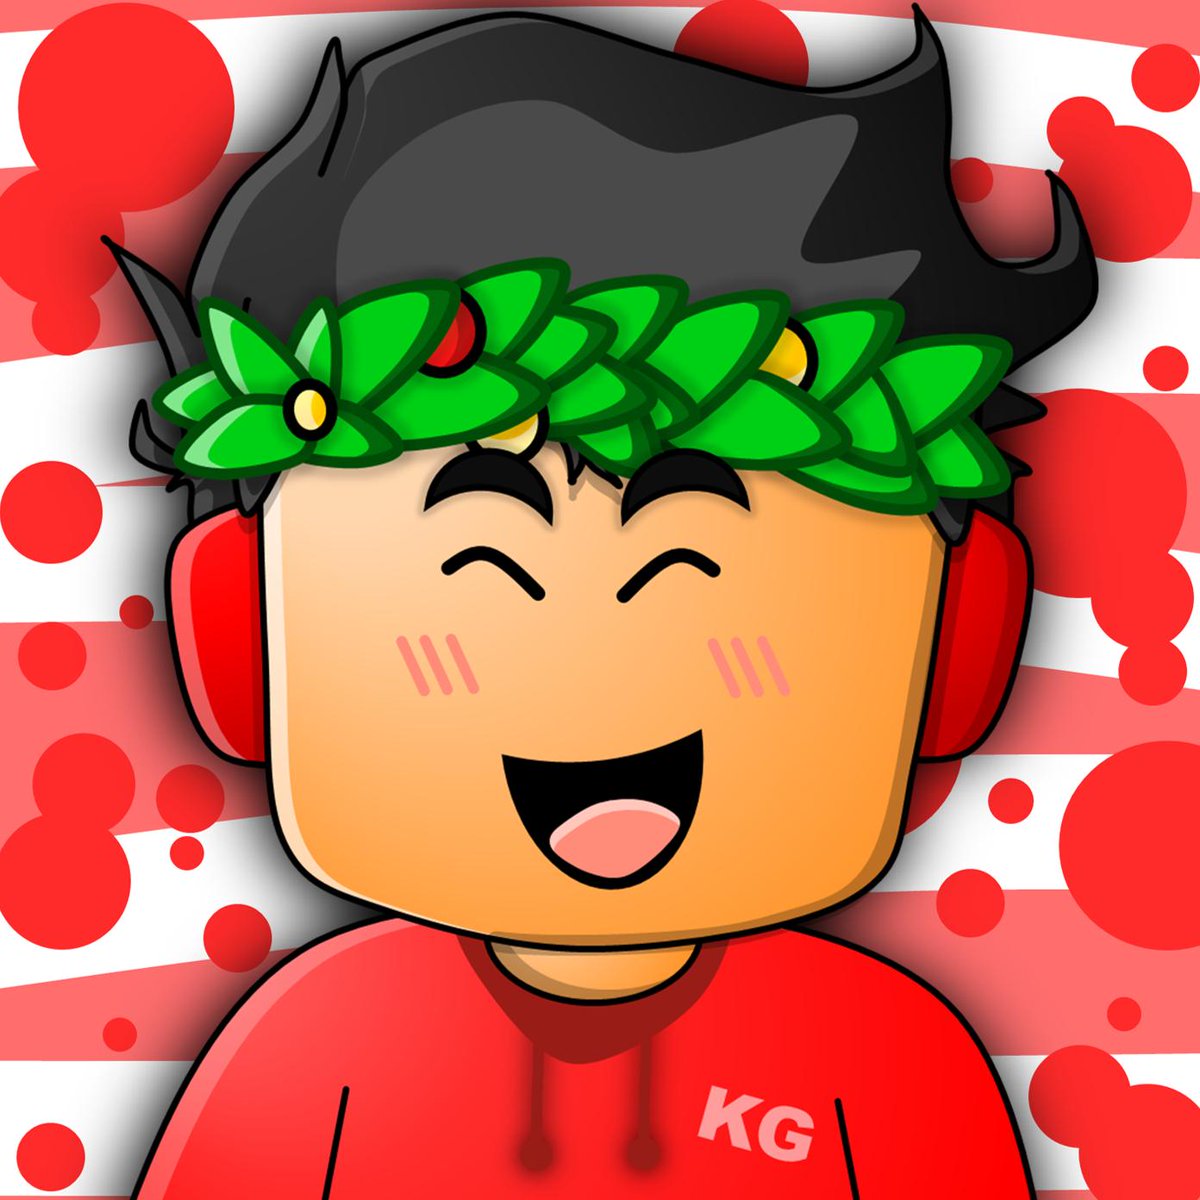 Darindh V Twitter Commission For Killerguytweets Roblox - darindh on twitter commission for killerguytweets roblox